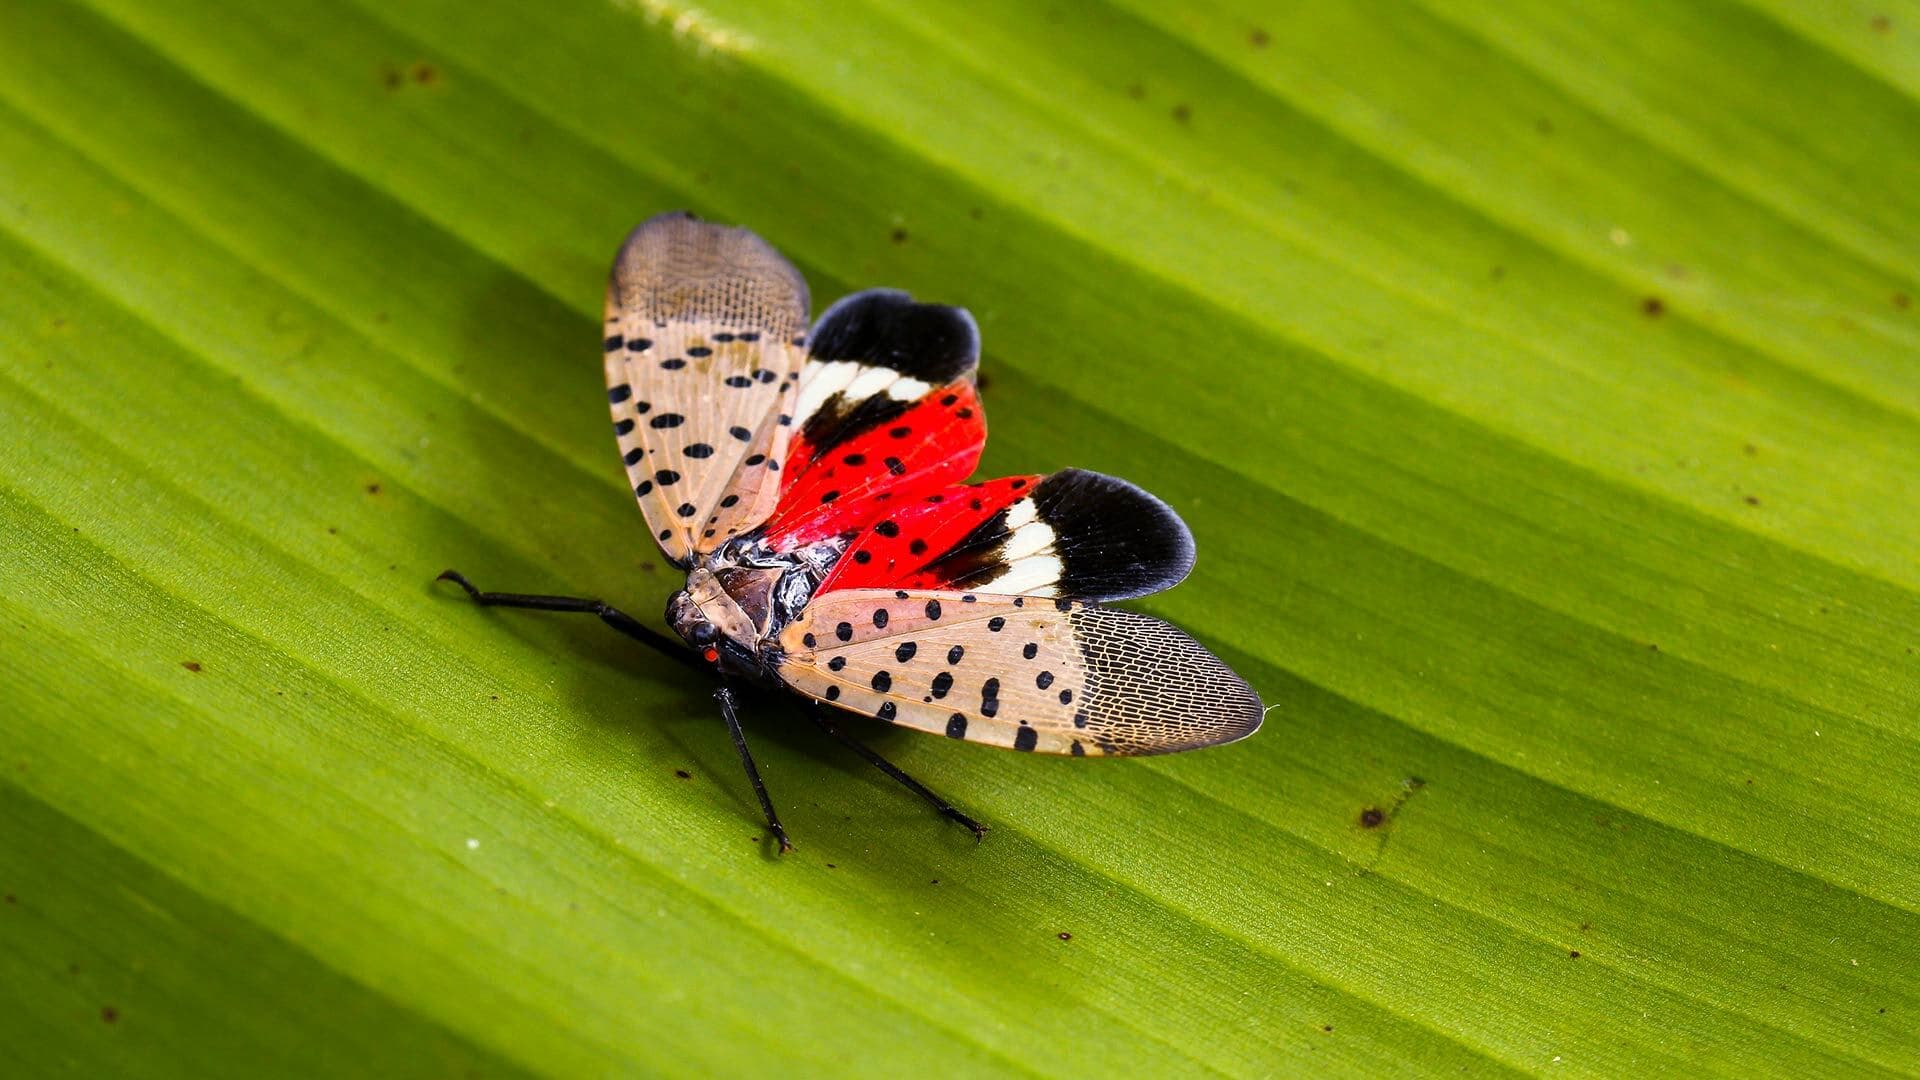 Destructive lanternflies, which threaten agriculture, have been spotted in Maryland, says entomology Professor Mike Raupp, aka "The Bug Guy."